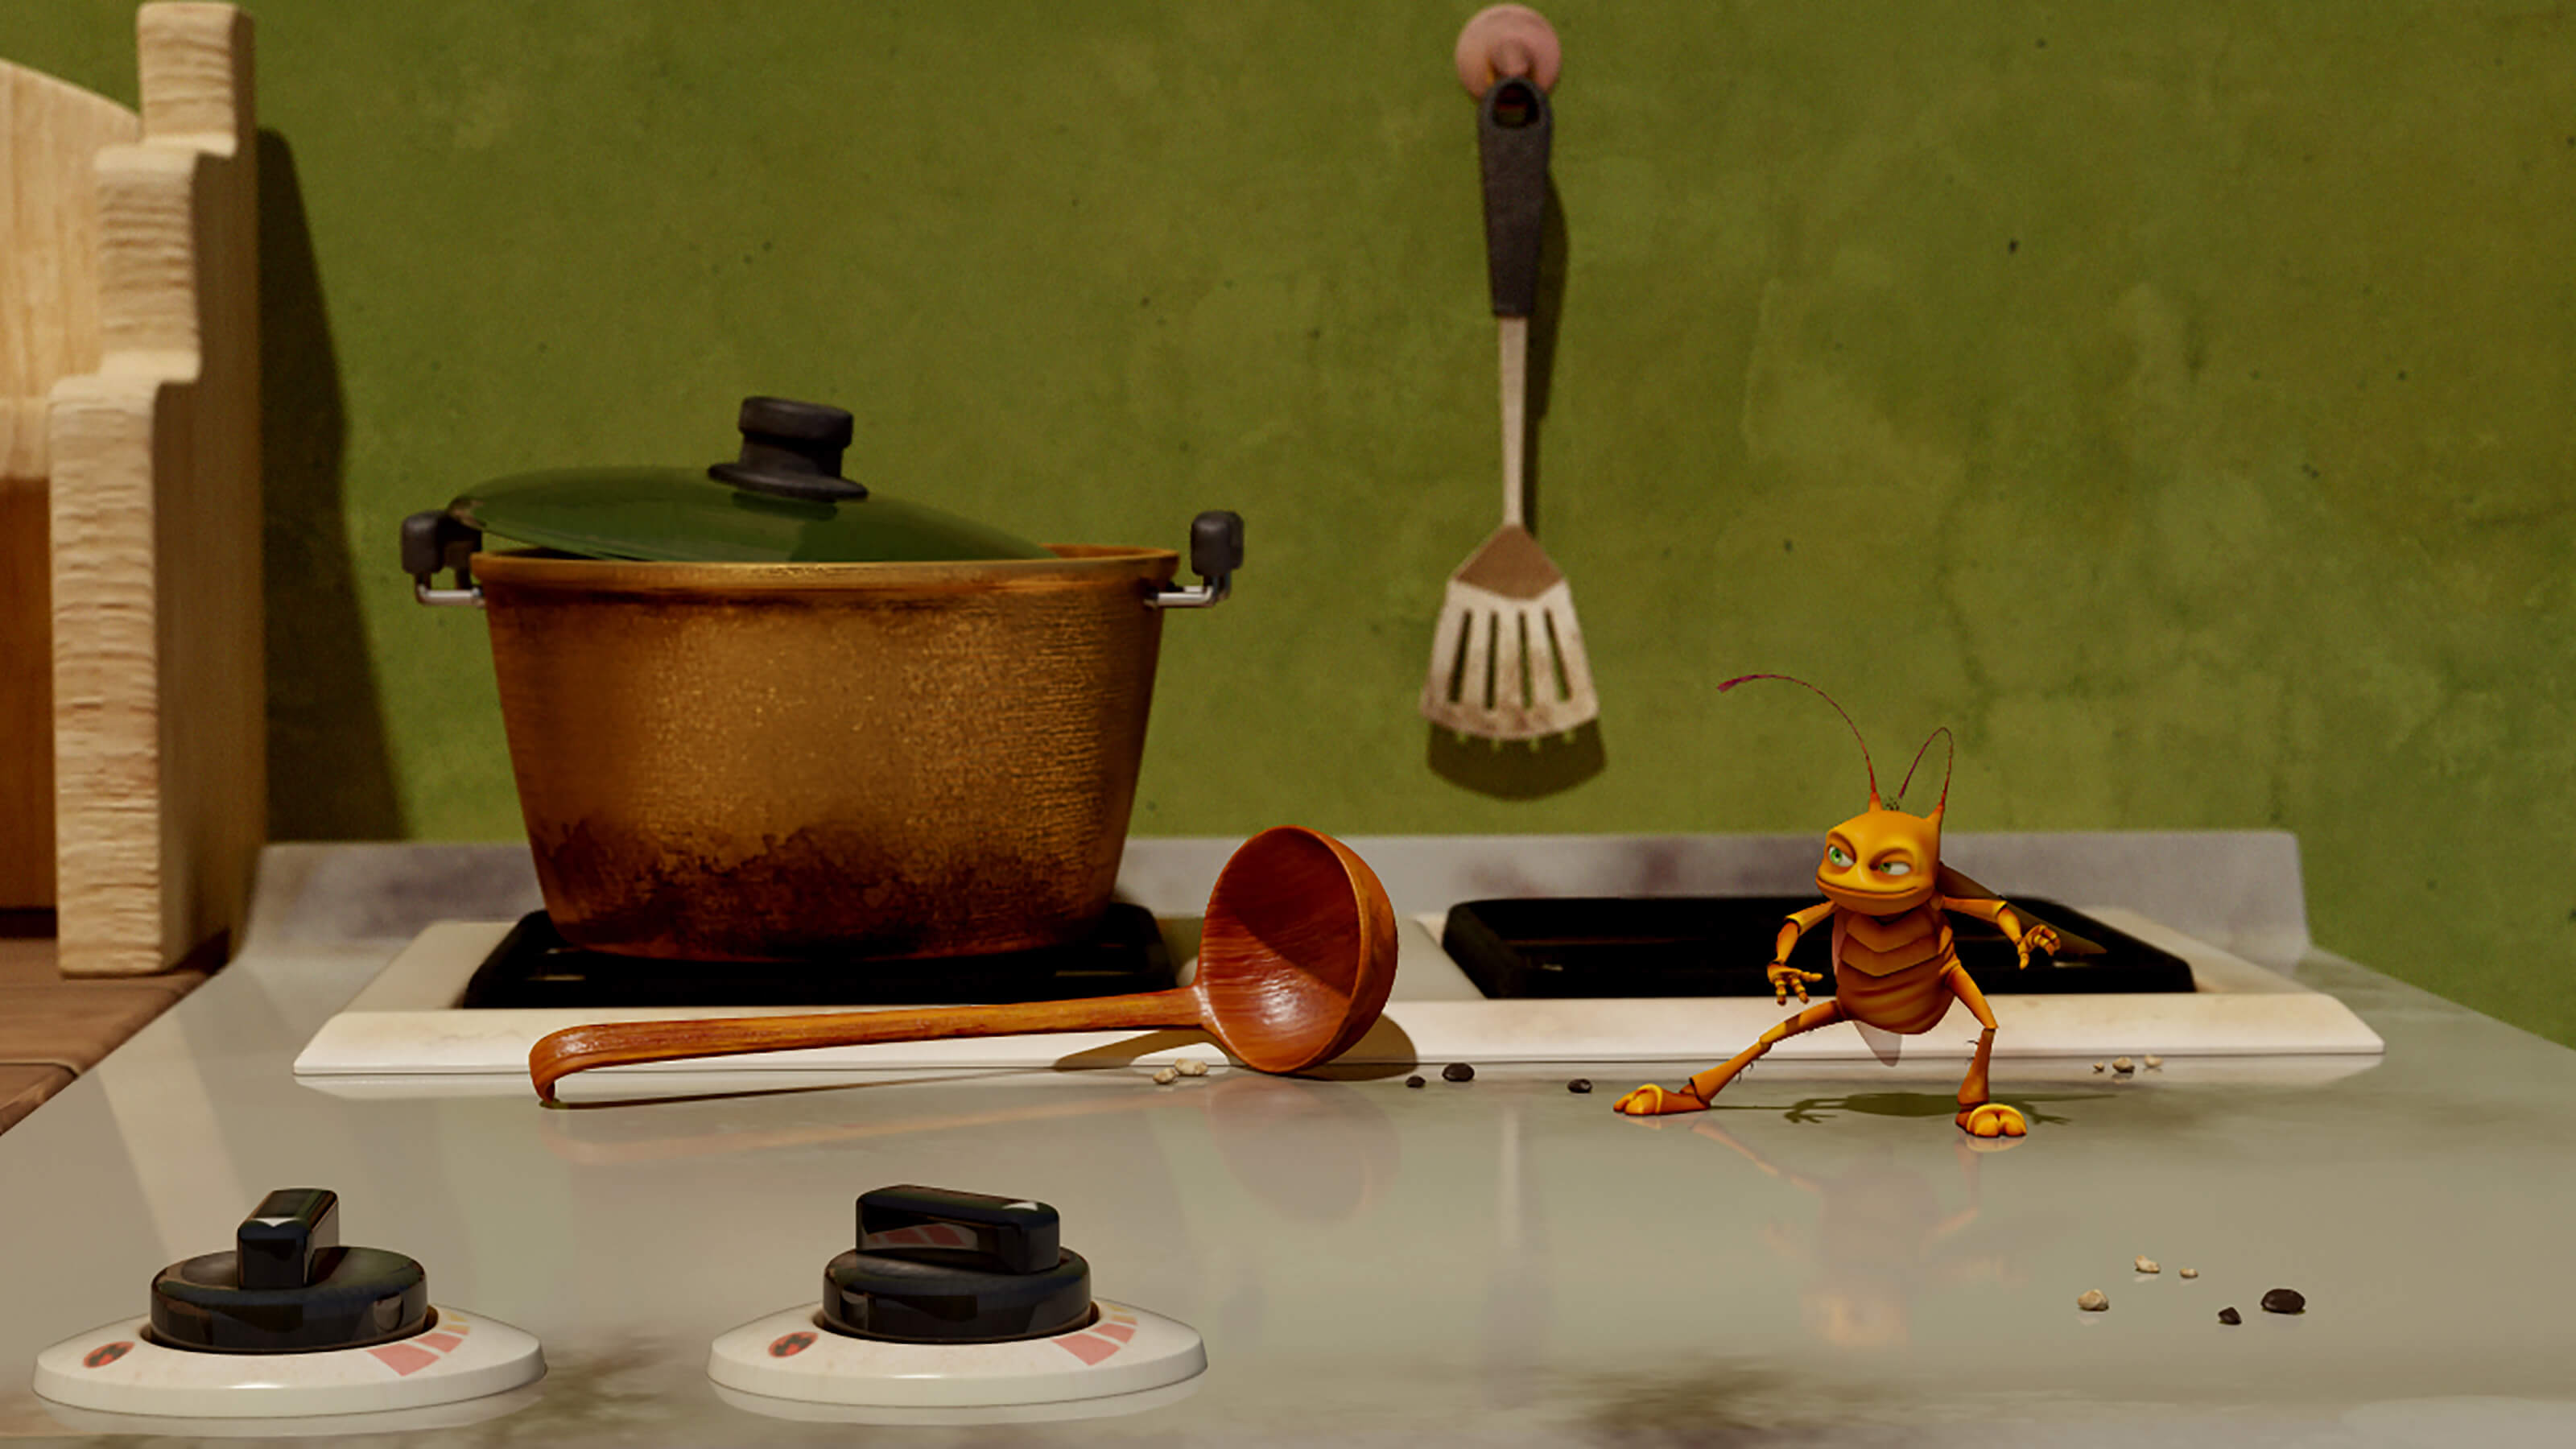 A CG-animated roach crouches adroitly on a stovetop in front of a pot and wooden ladle.